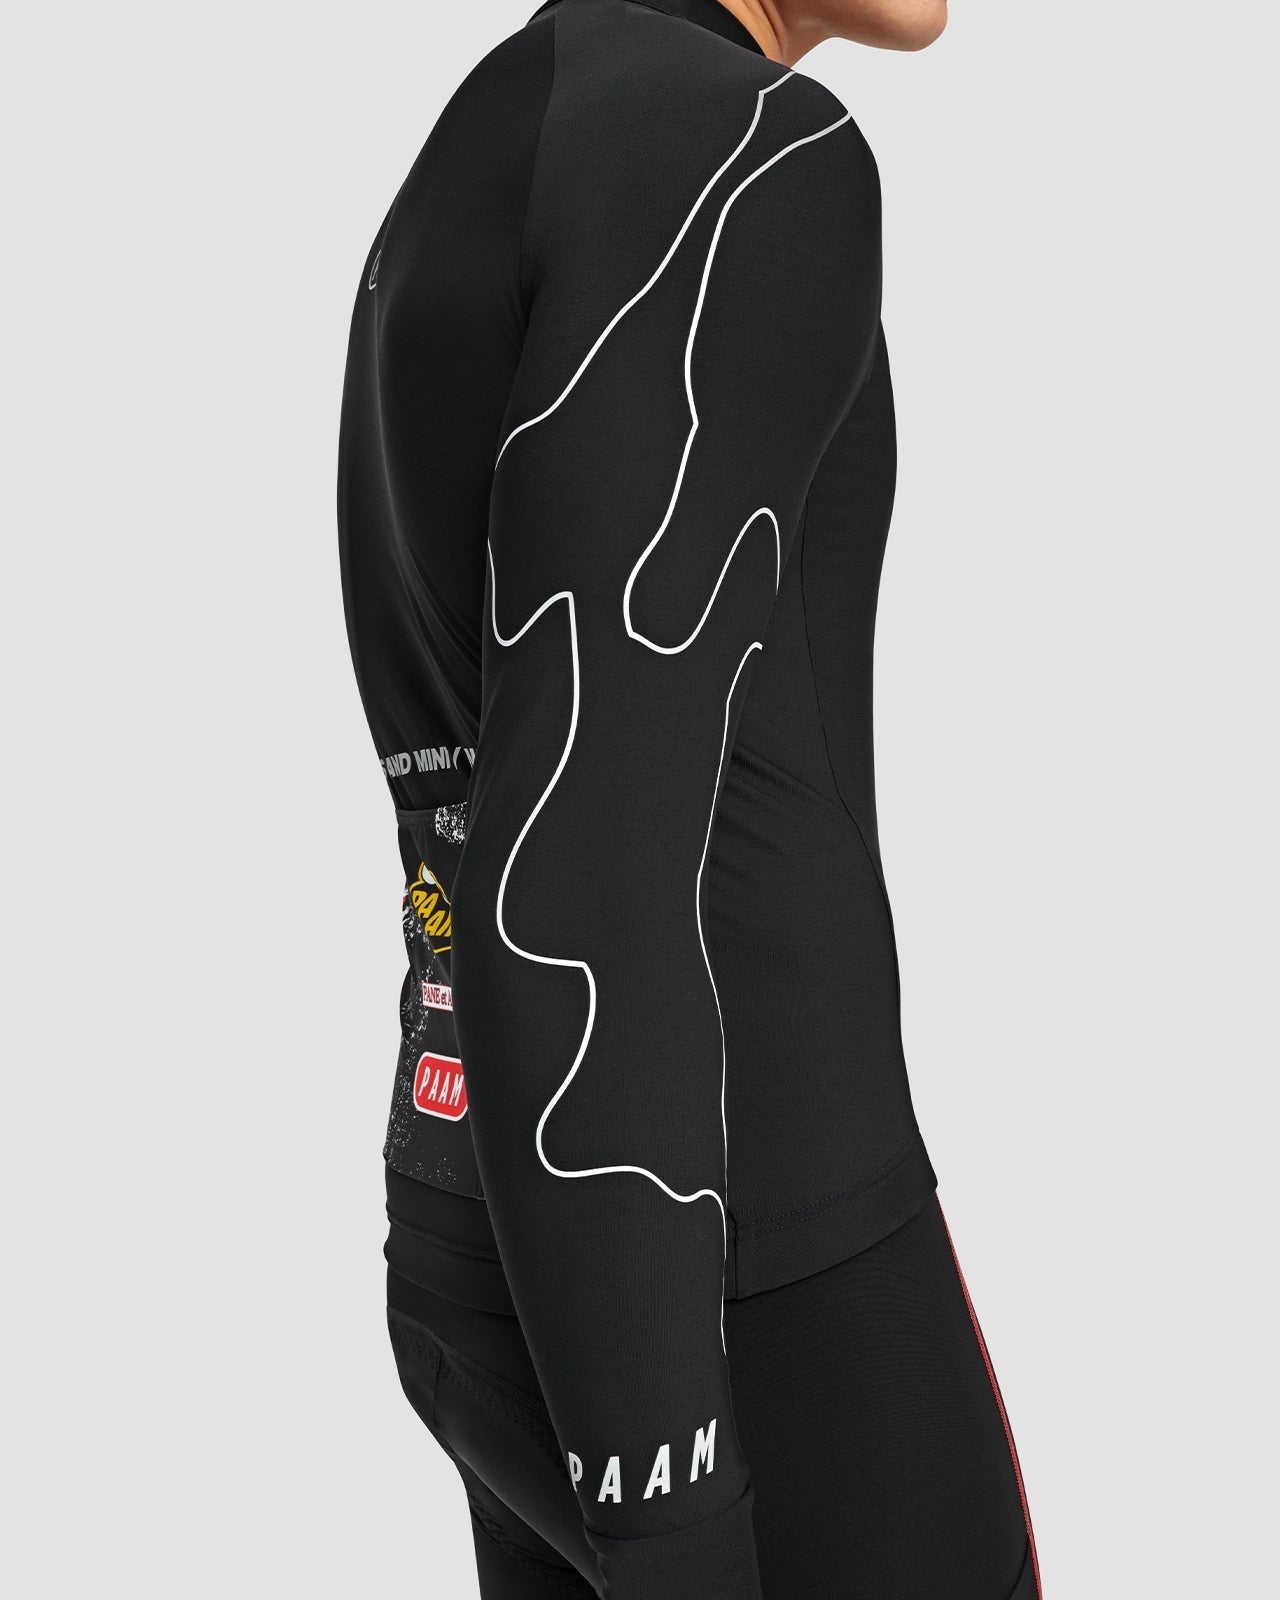 x PAM Thermal LS Jersey - Black | Enroute.cc